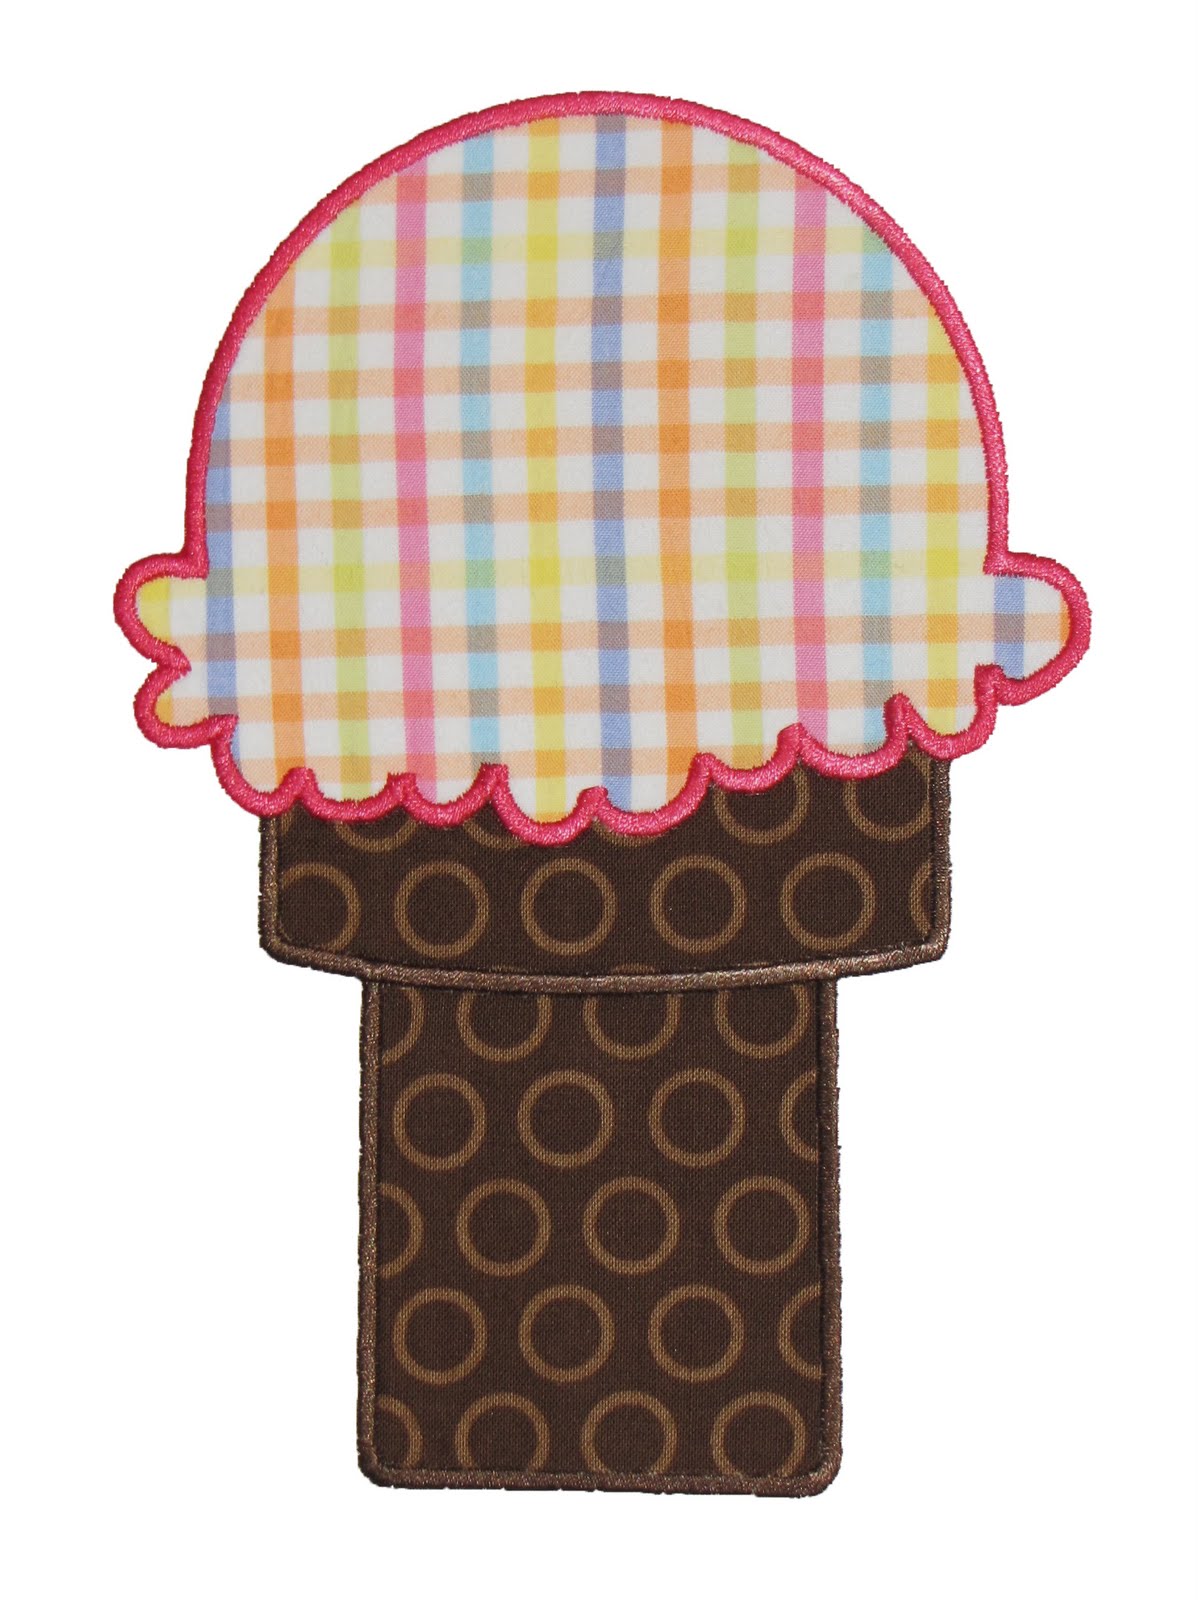 Sweet Treat Ice Cream Cone Embroidery Design Canvas Bag from